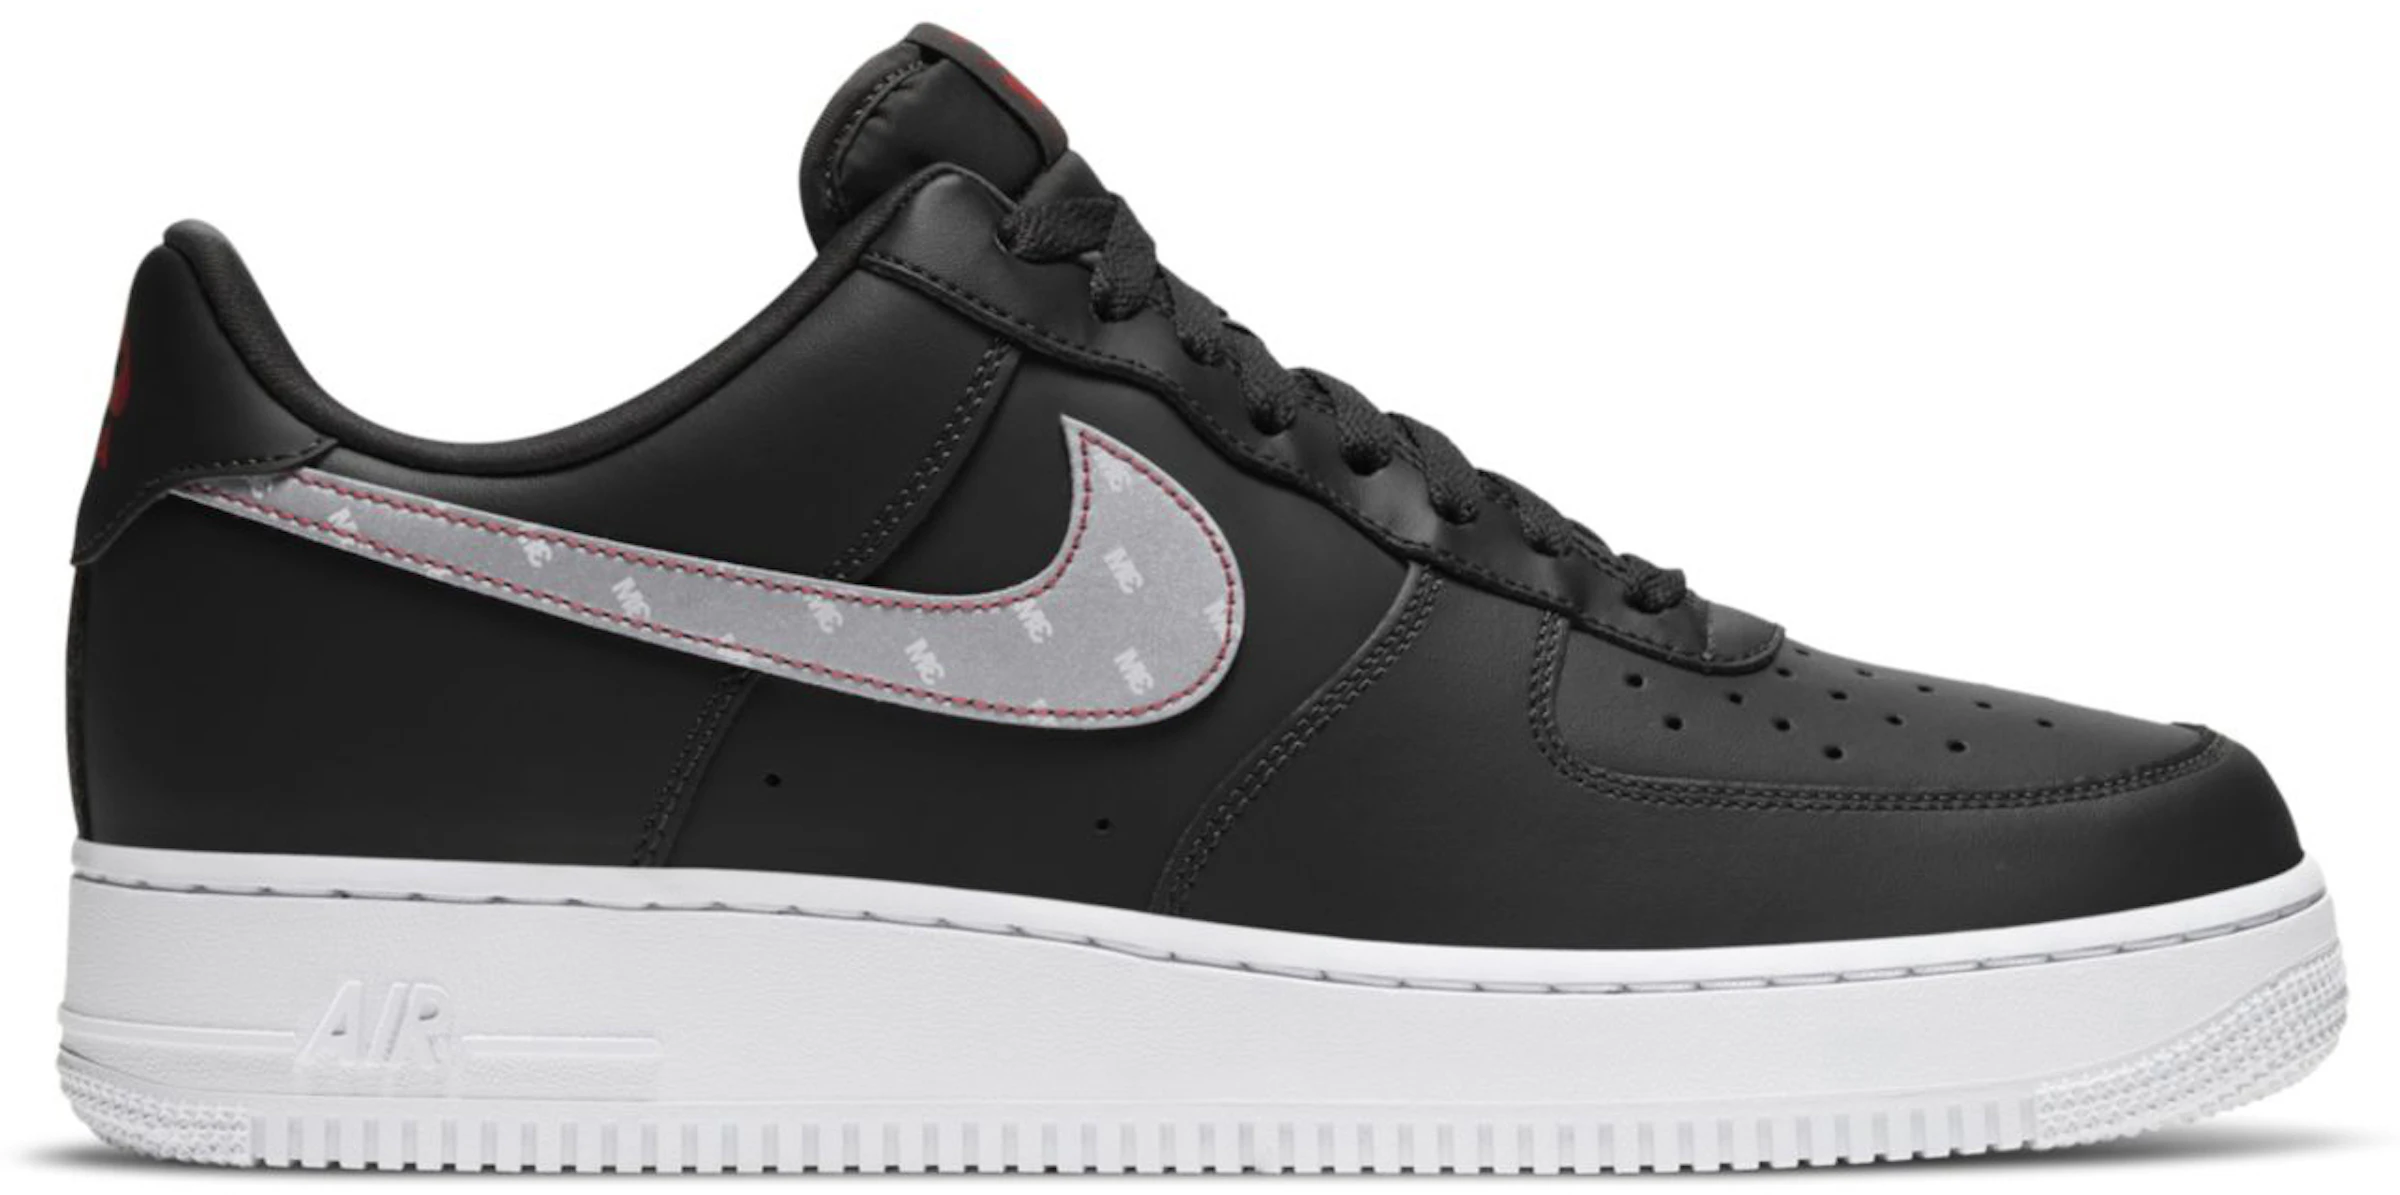 Nike Force 1 3M Anthracite Silver - CT2296-003 - US